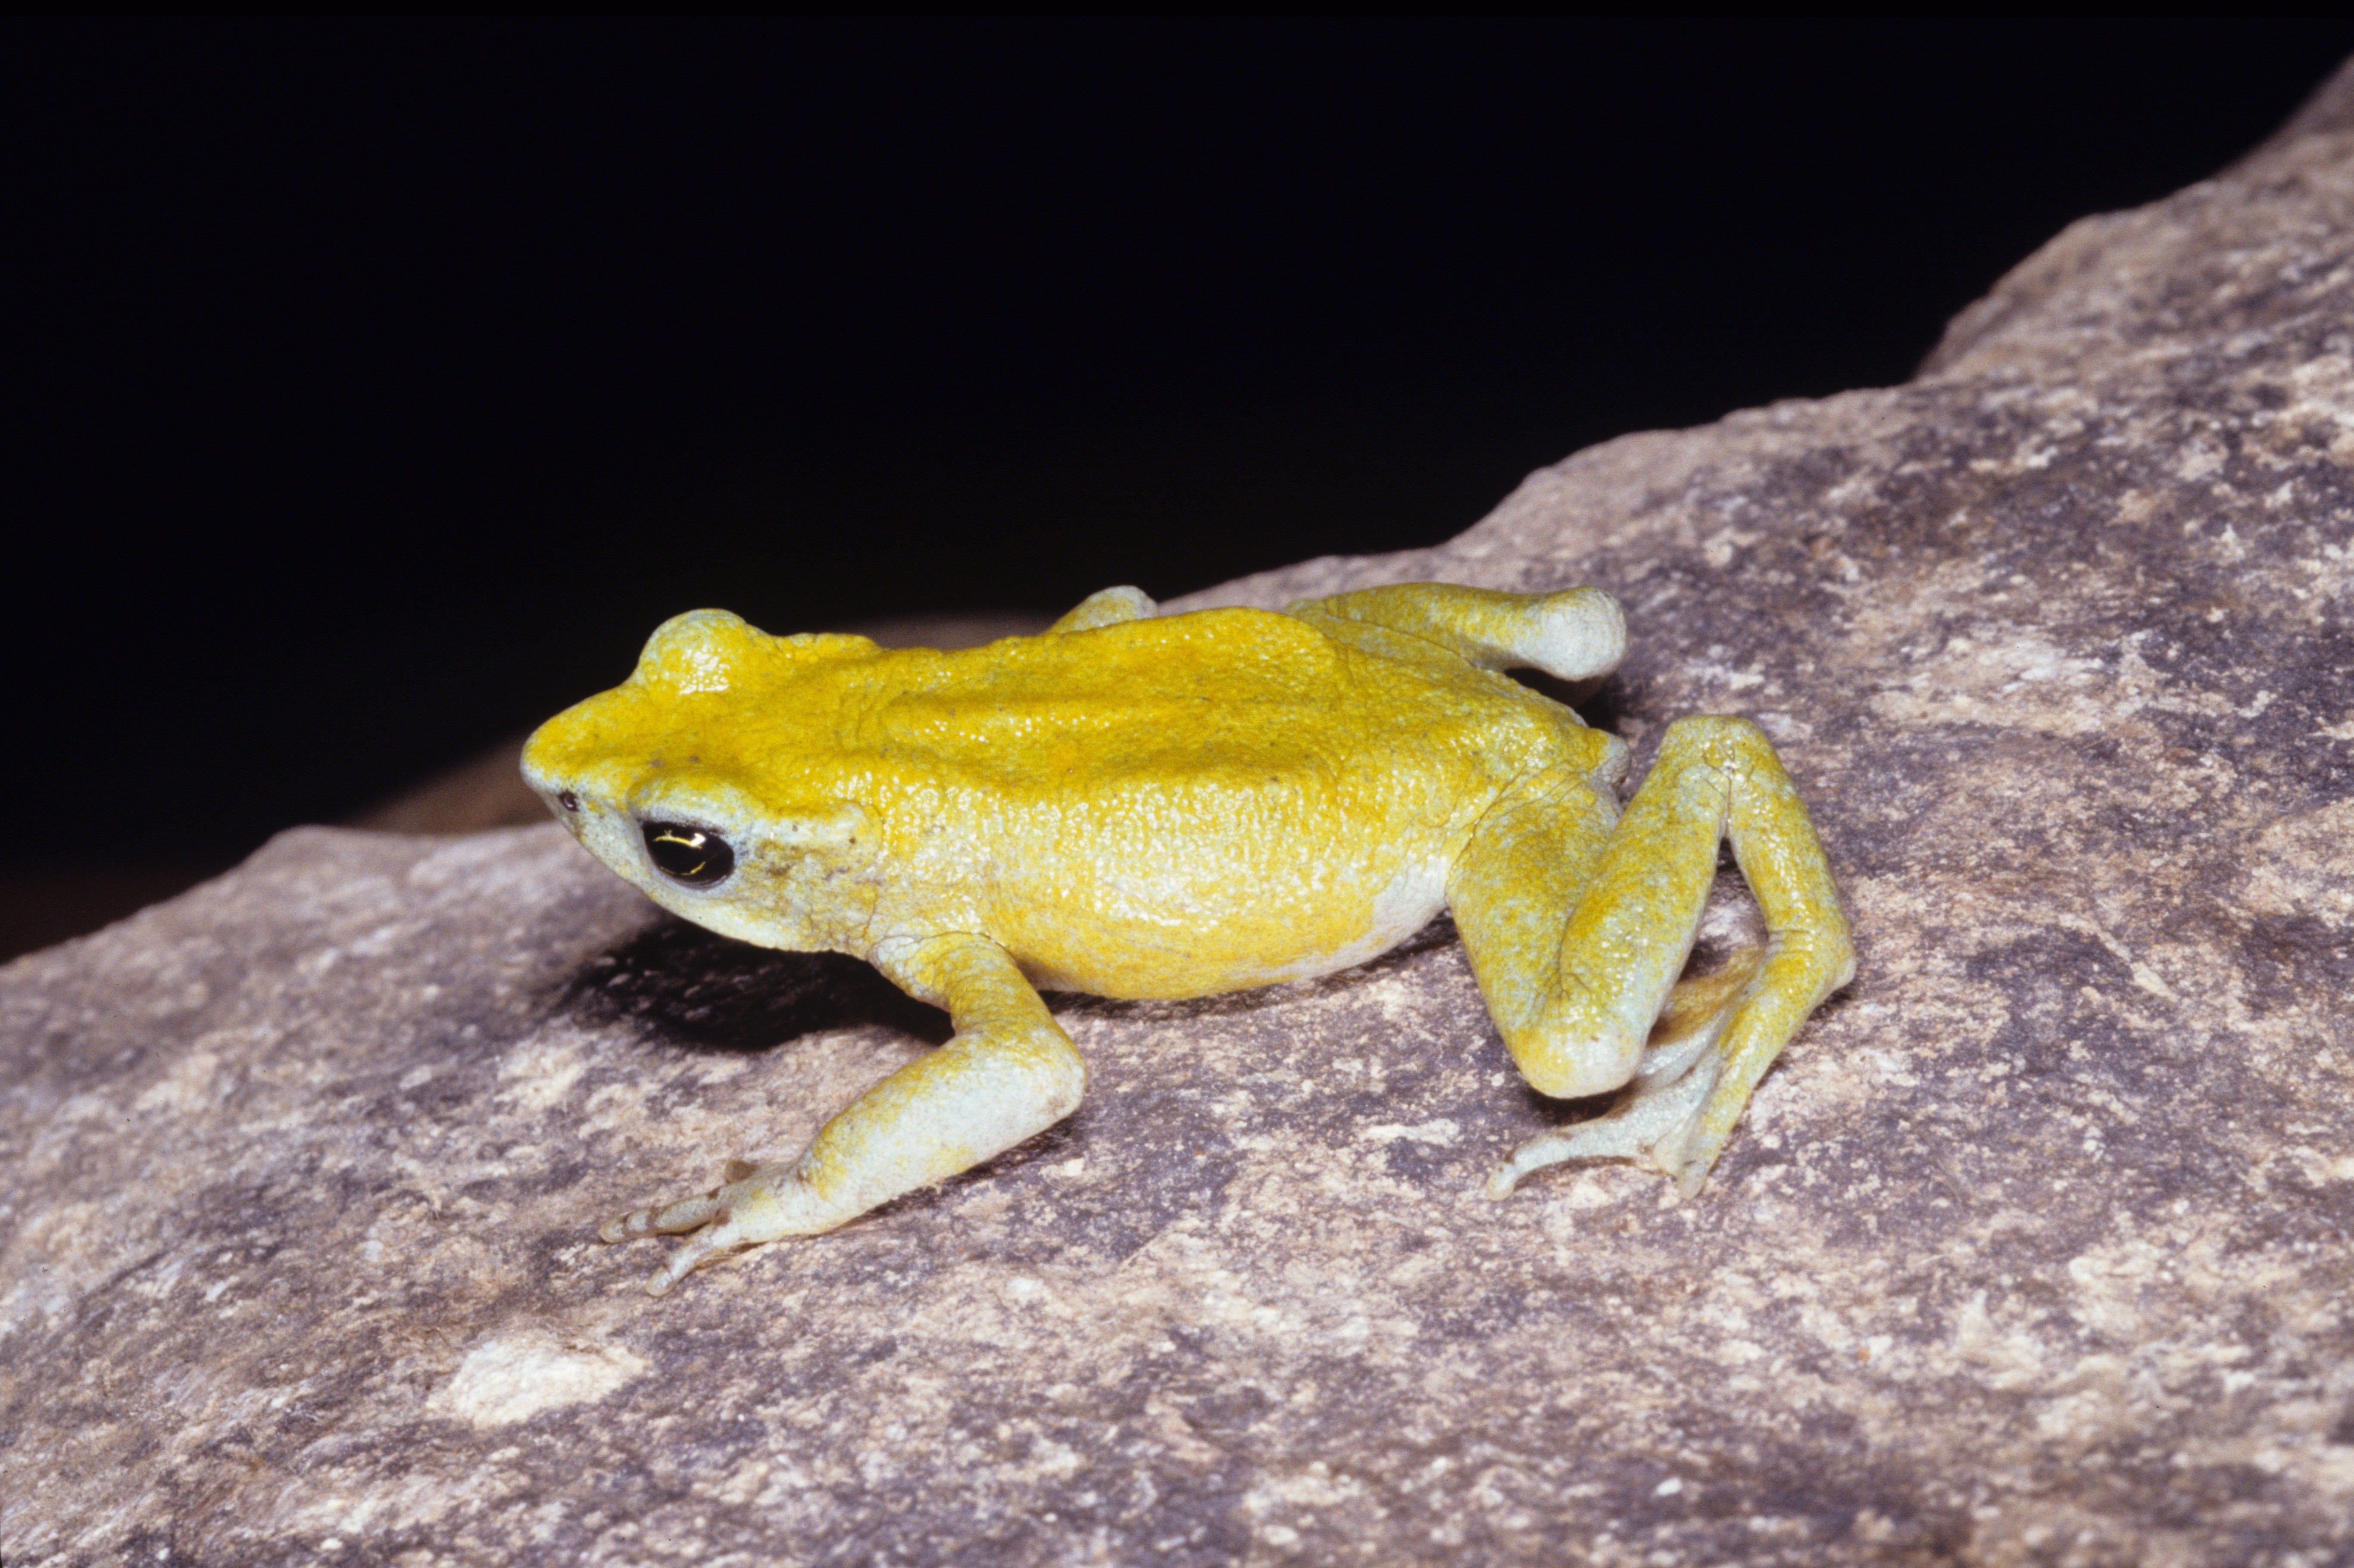 yellow frog sits on beige surface with black background